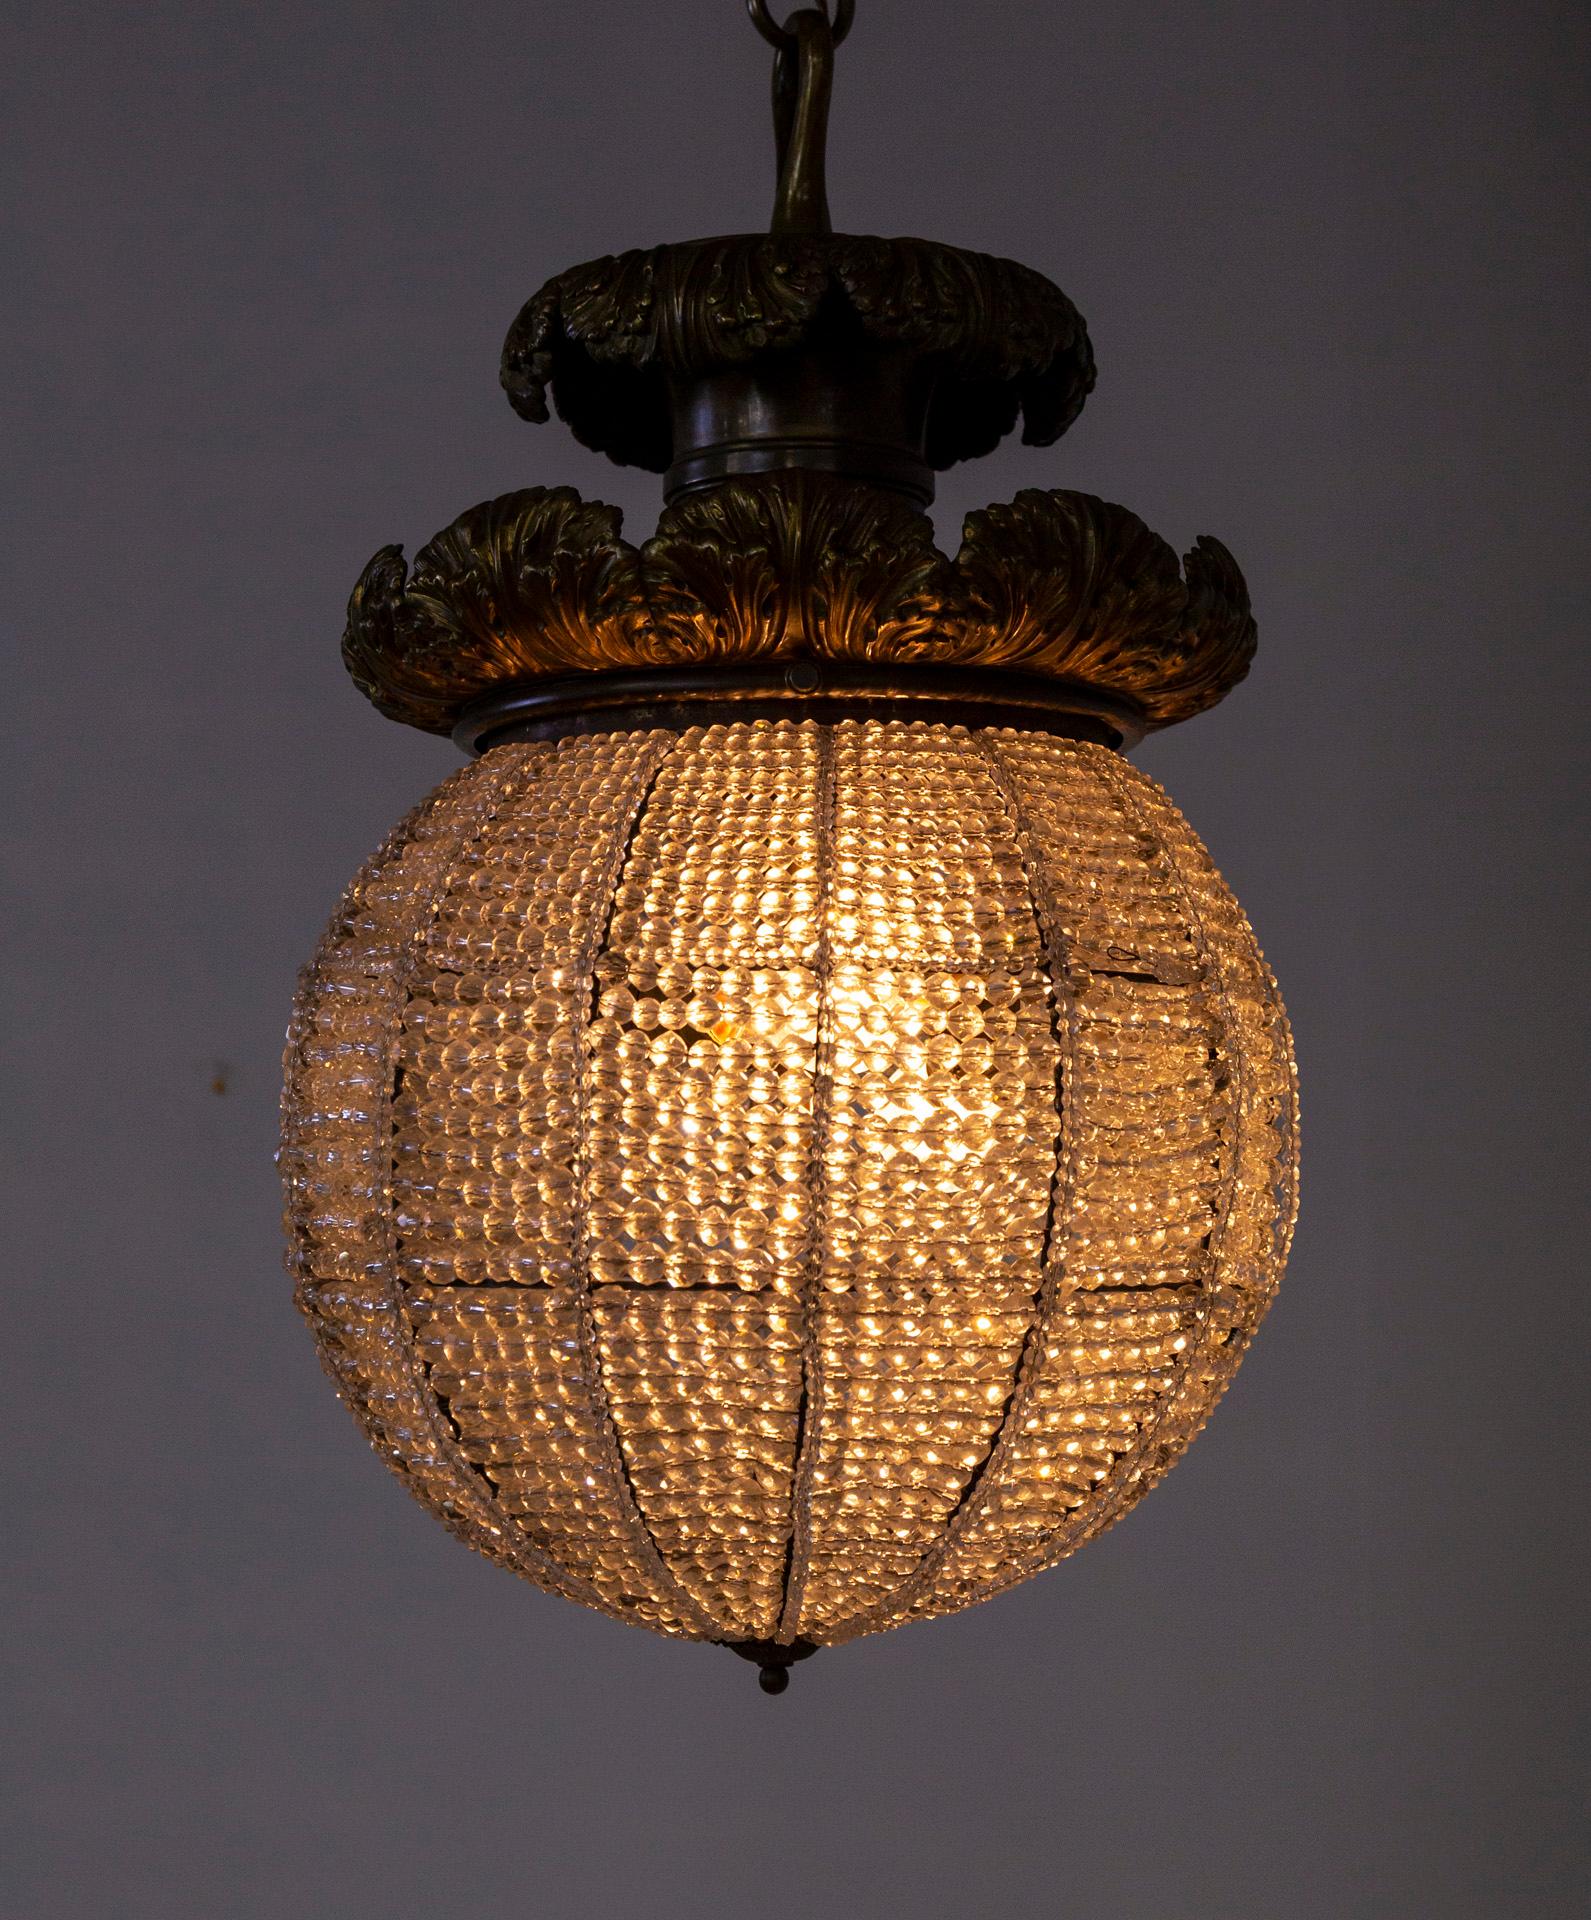 Large Belle Epoque Beaded Crystal Sphere Light Fixture w/ Bronze Foliate In Good Condition For Sale In San Francisco, CA